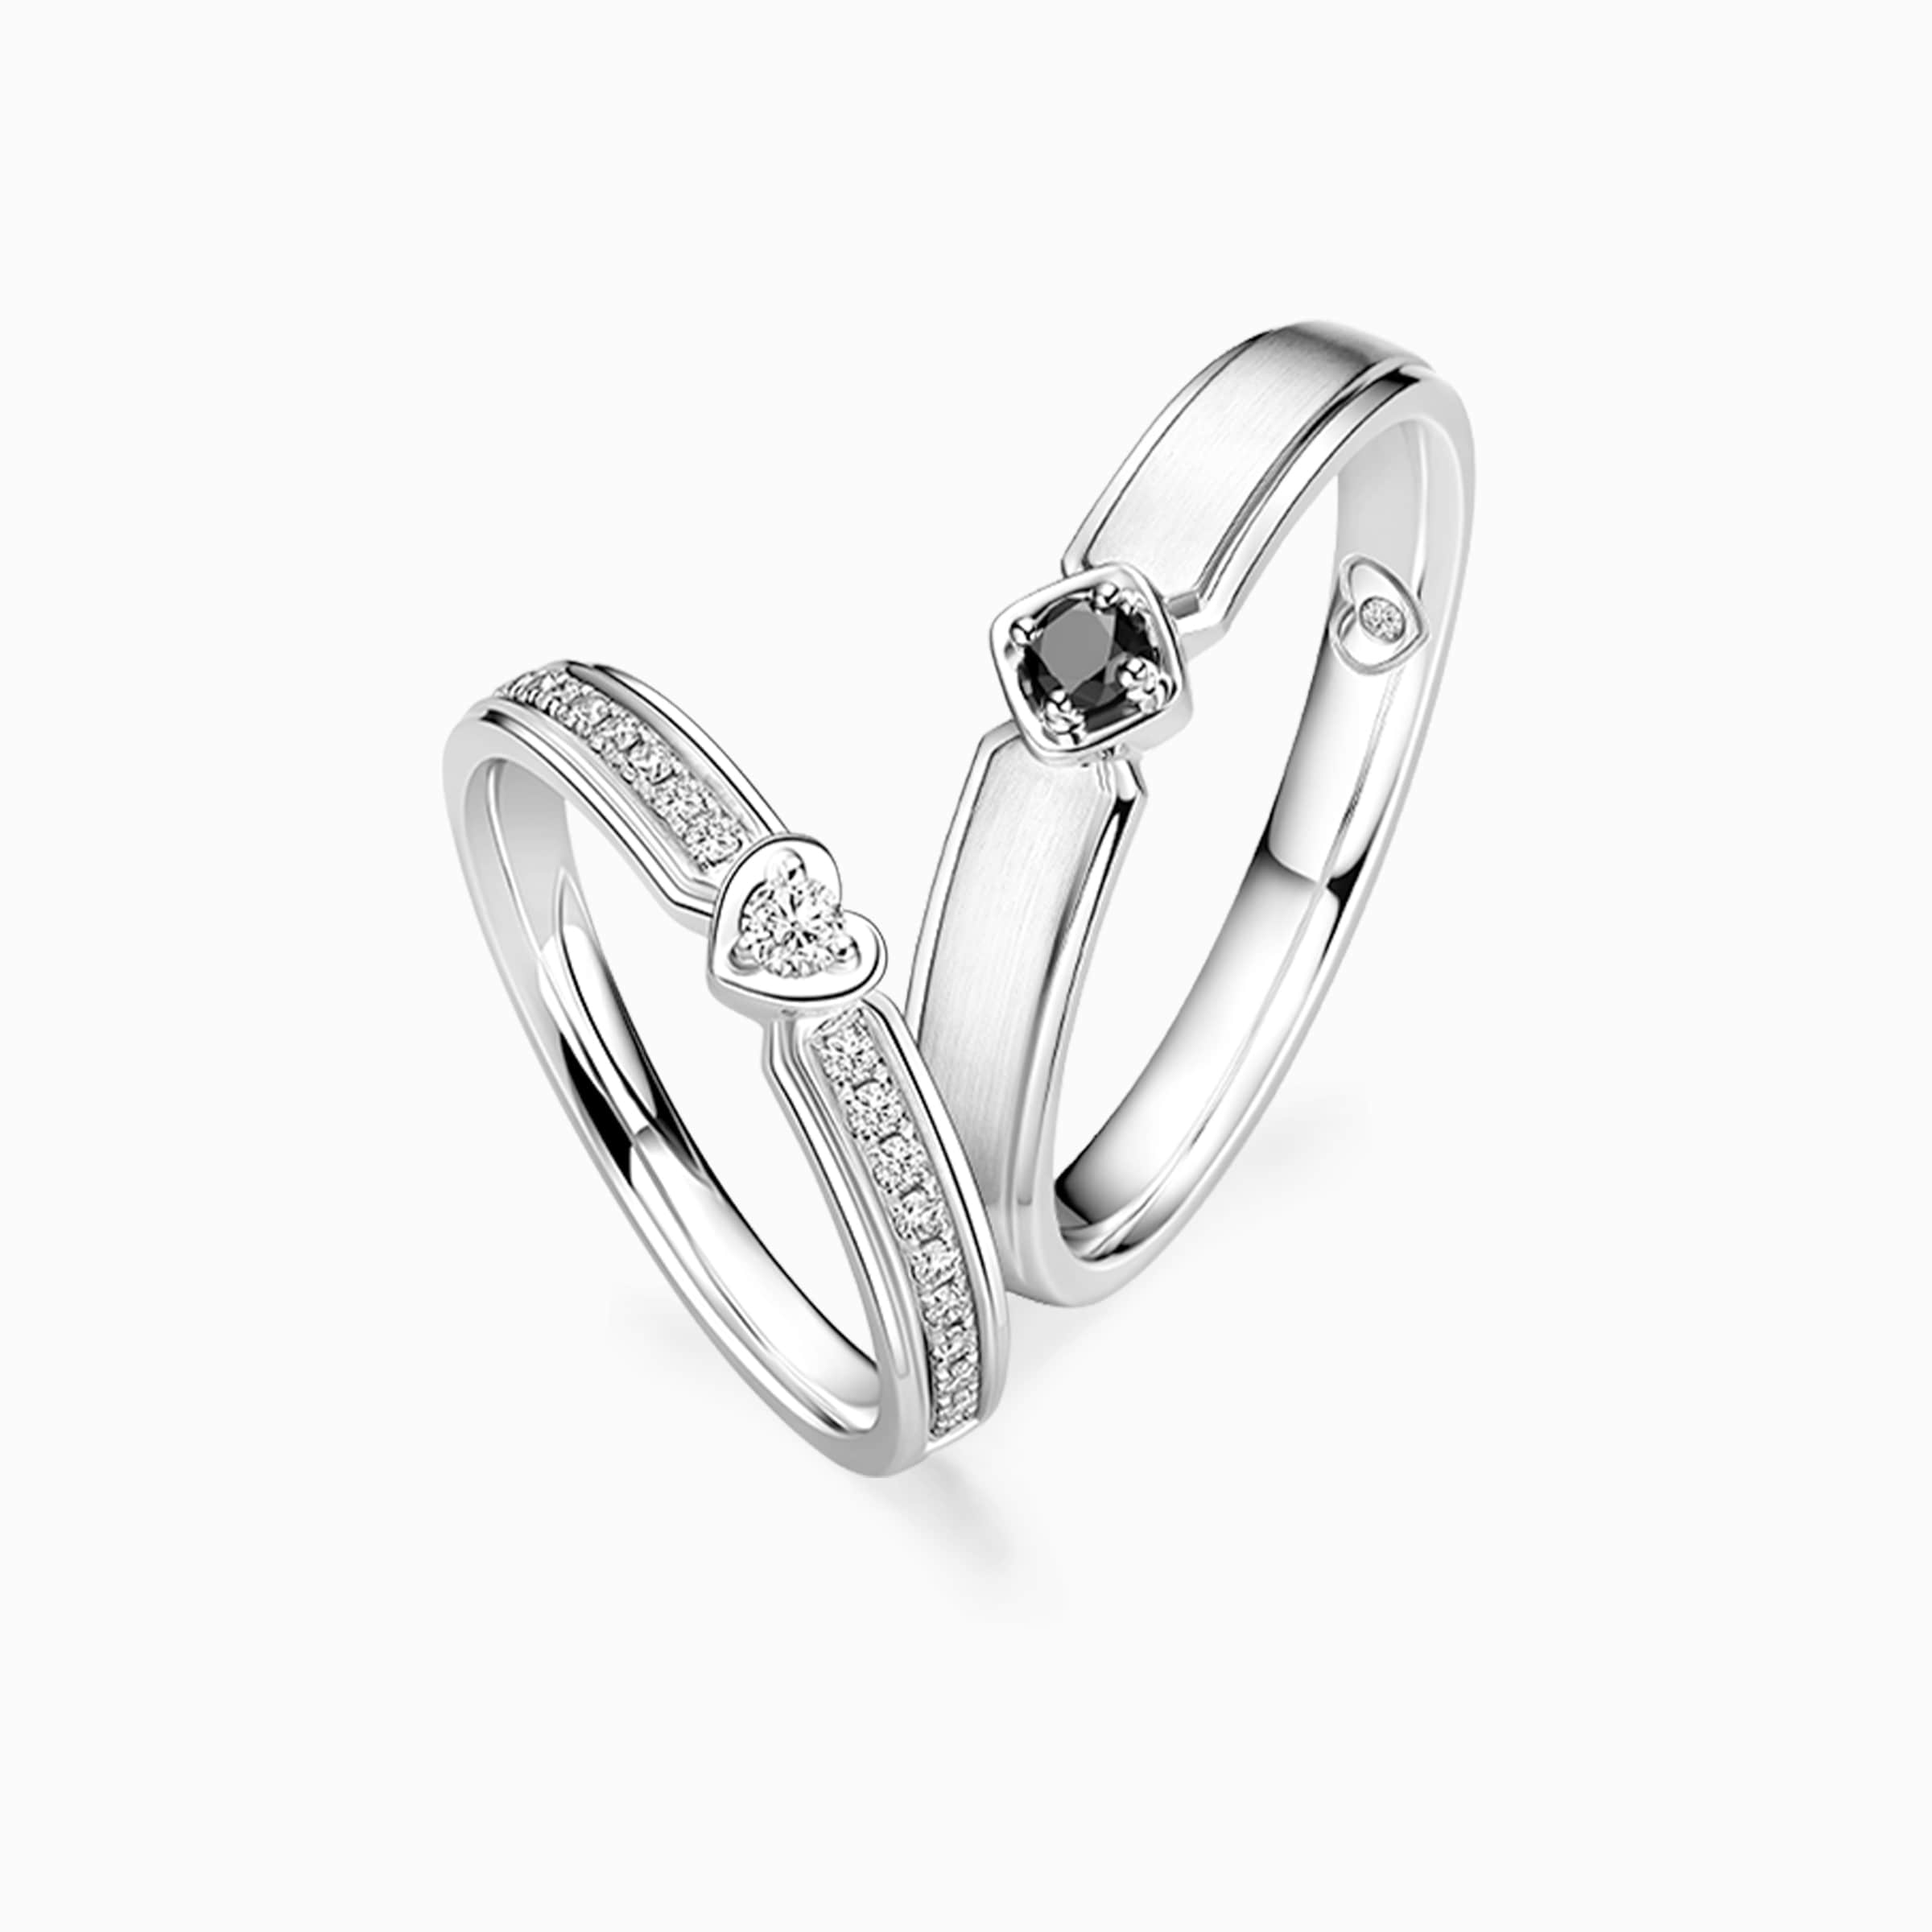 Darry Ring diamond wedding rings set for man and woman